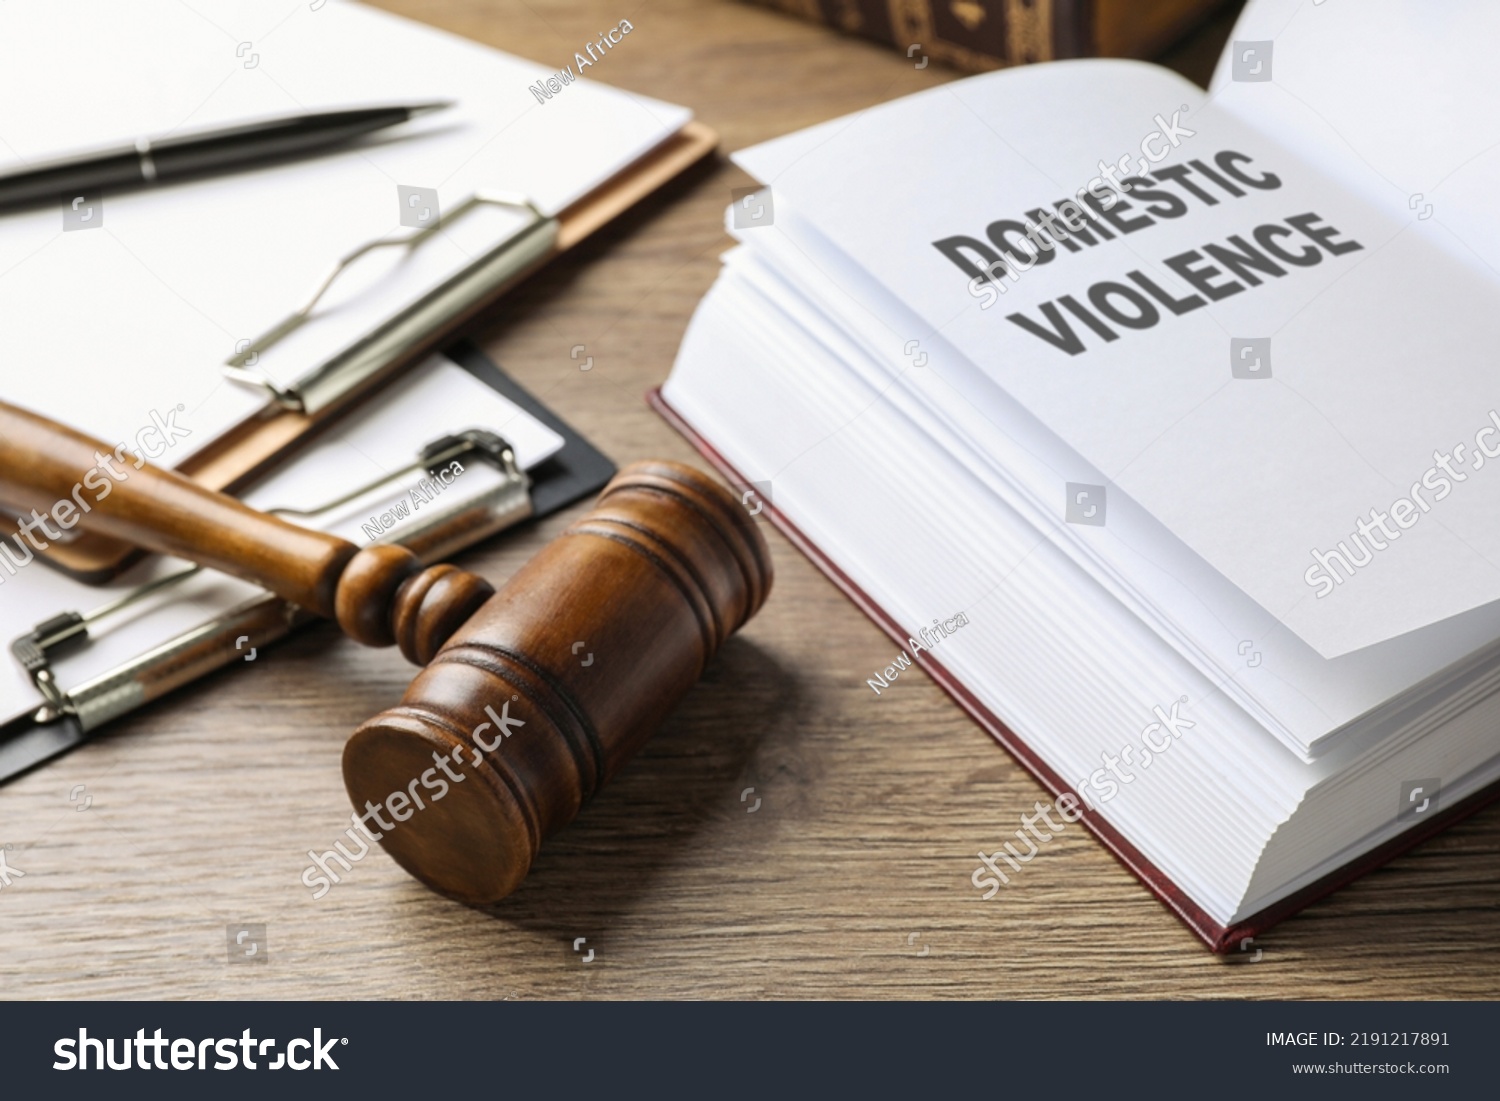 Wooden gavel and law book on wooden table. Protection from domestic violence #2191217891